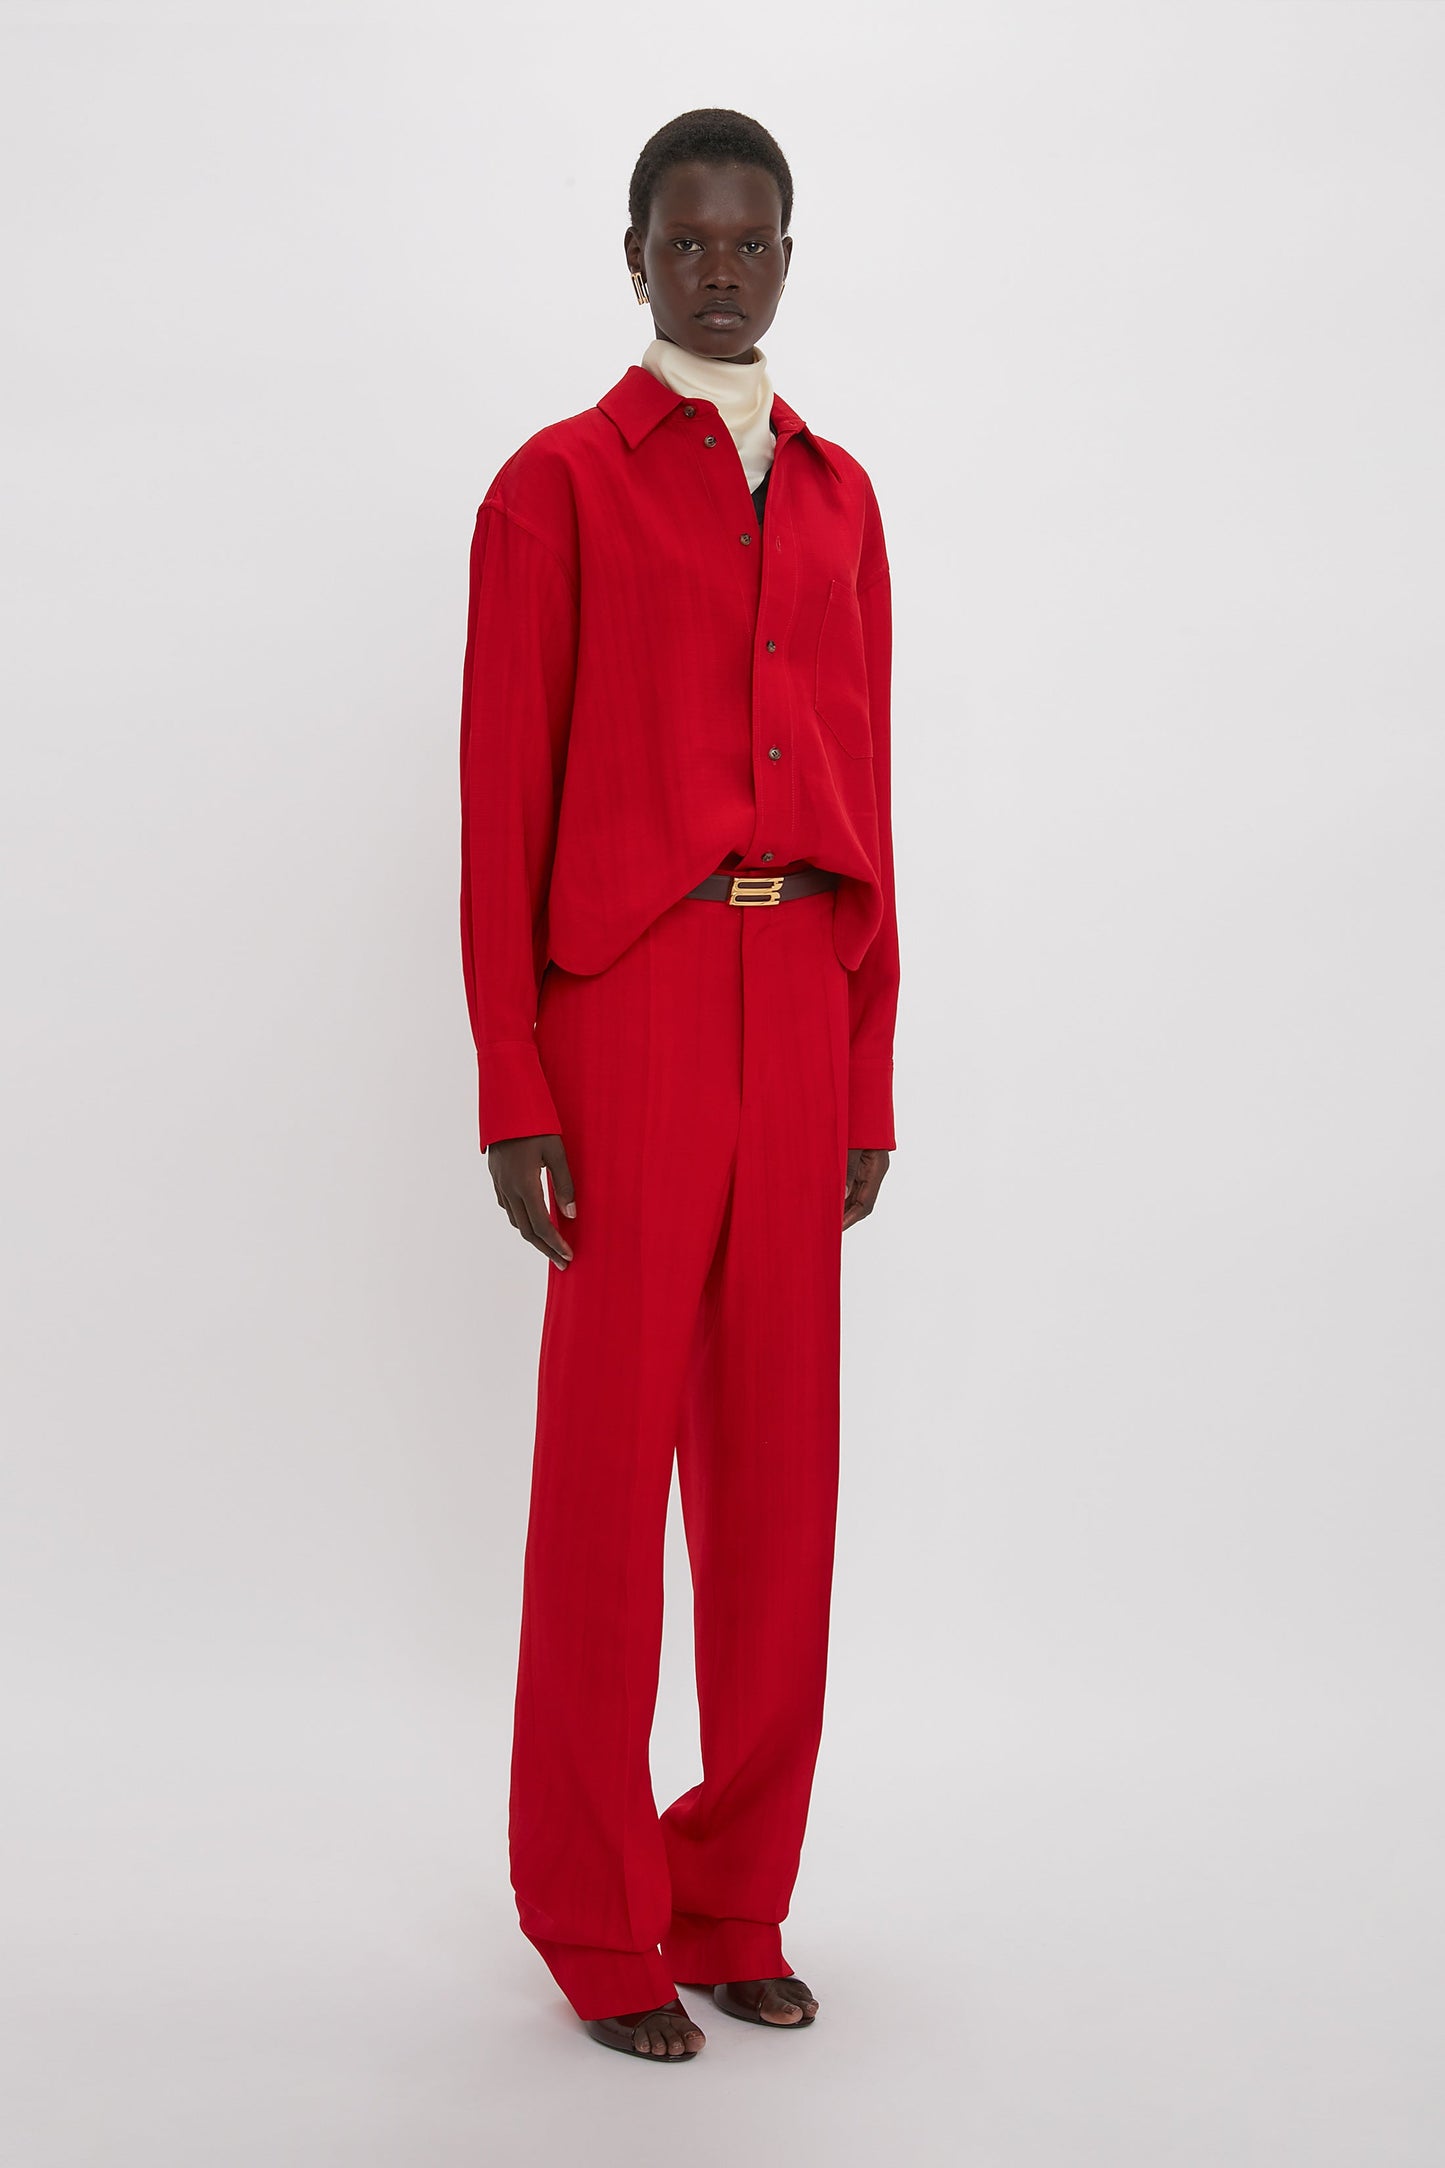 Person standing against a plain background, wearing a bright carmine red long-sleeve shirt and matching Victoria Beckham Tapered Leg Trouser In Carmine, paired with a white inner layer and red sandals, showcasing elements of traditional tailoring.